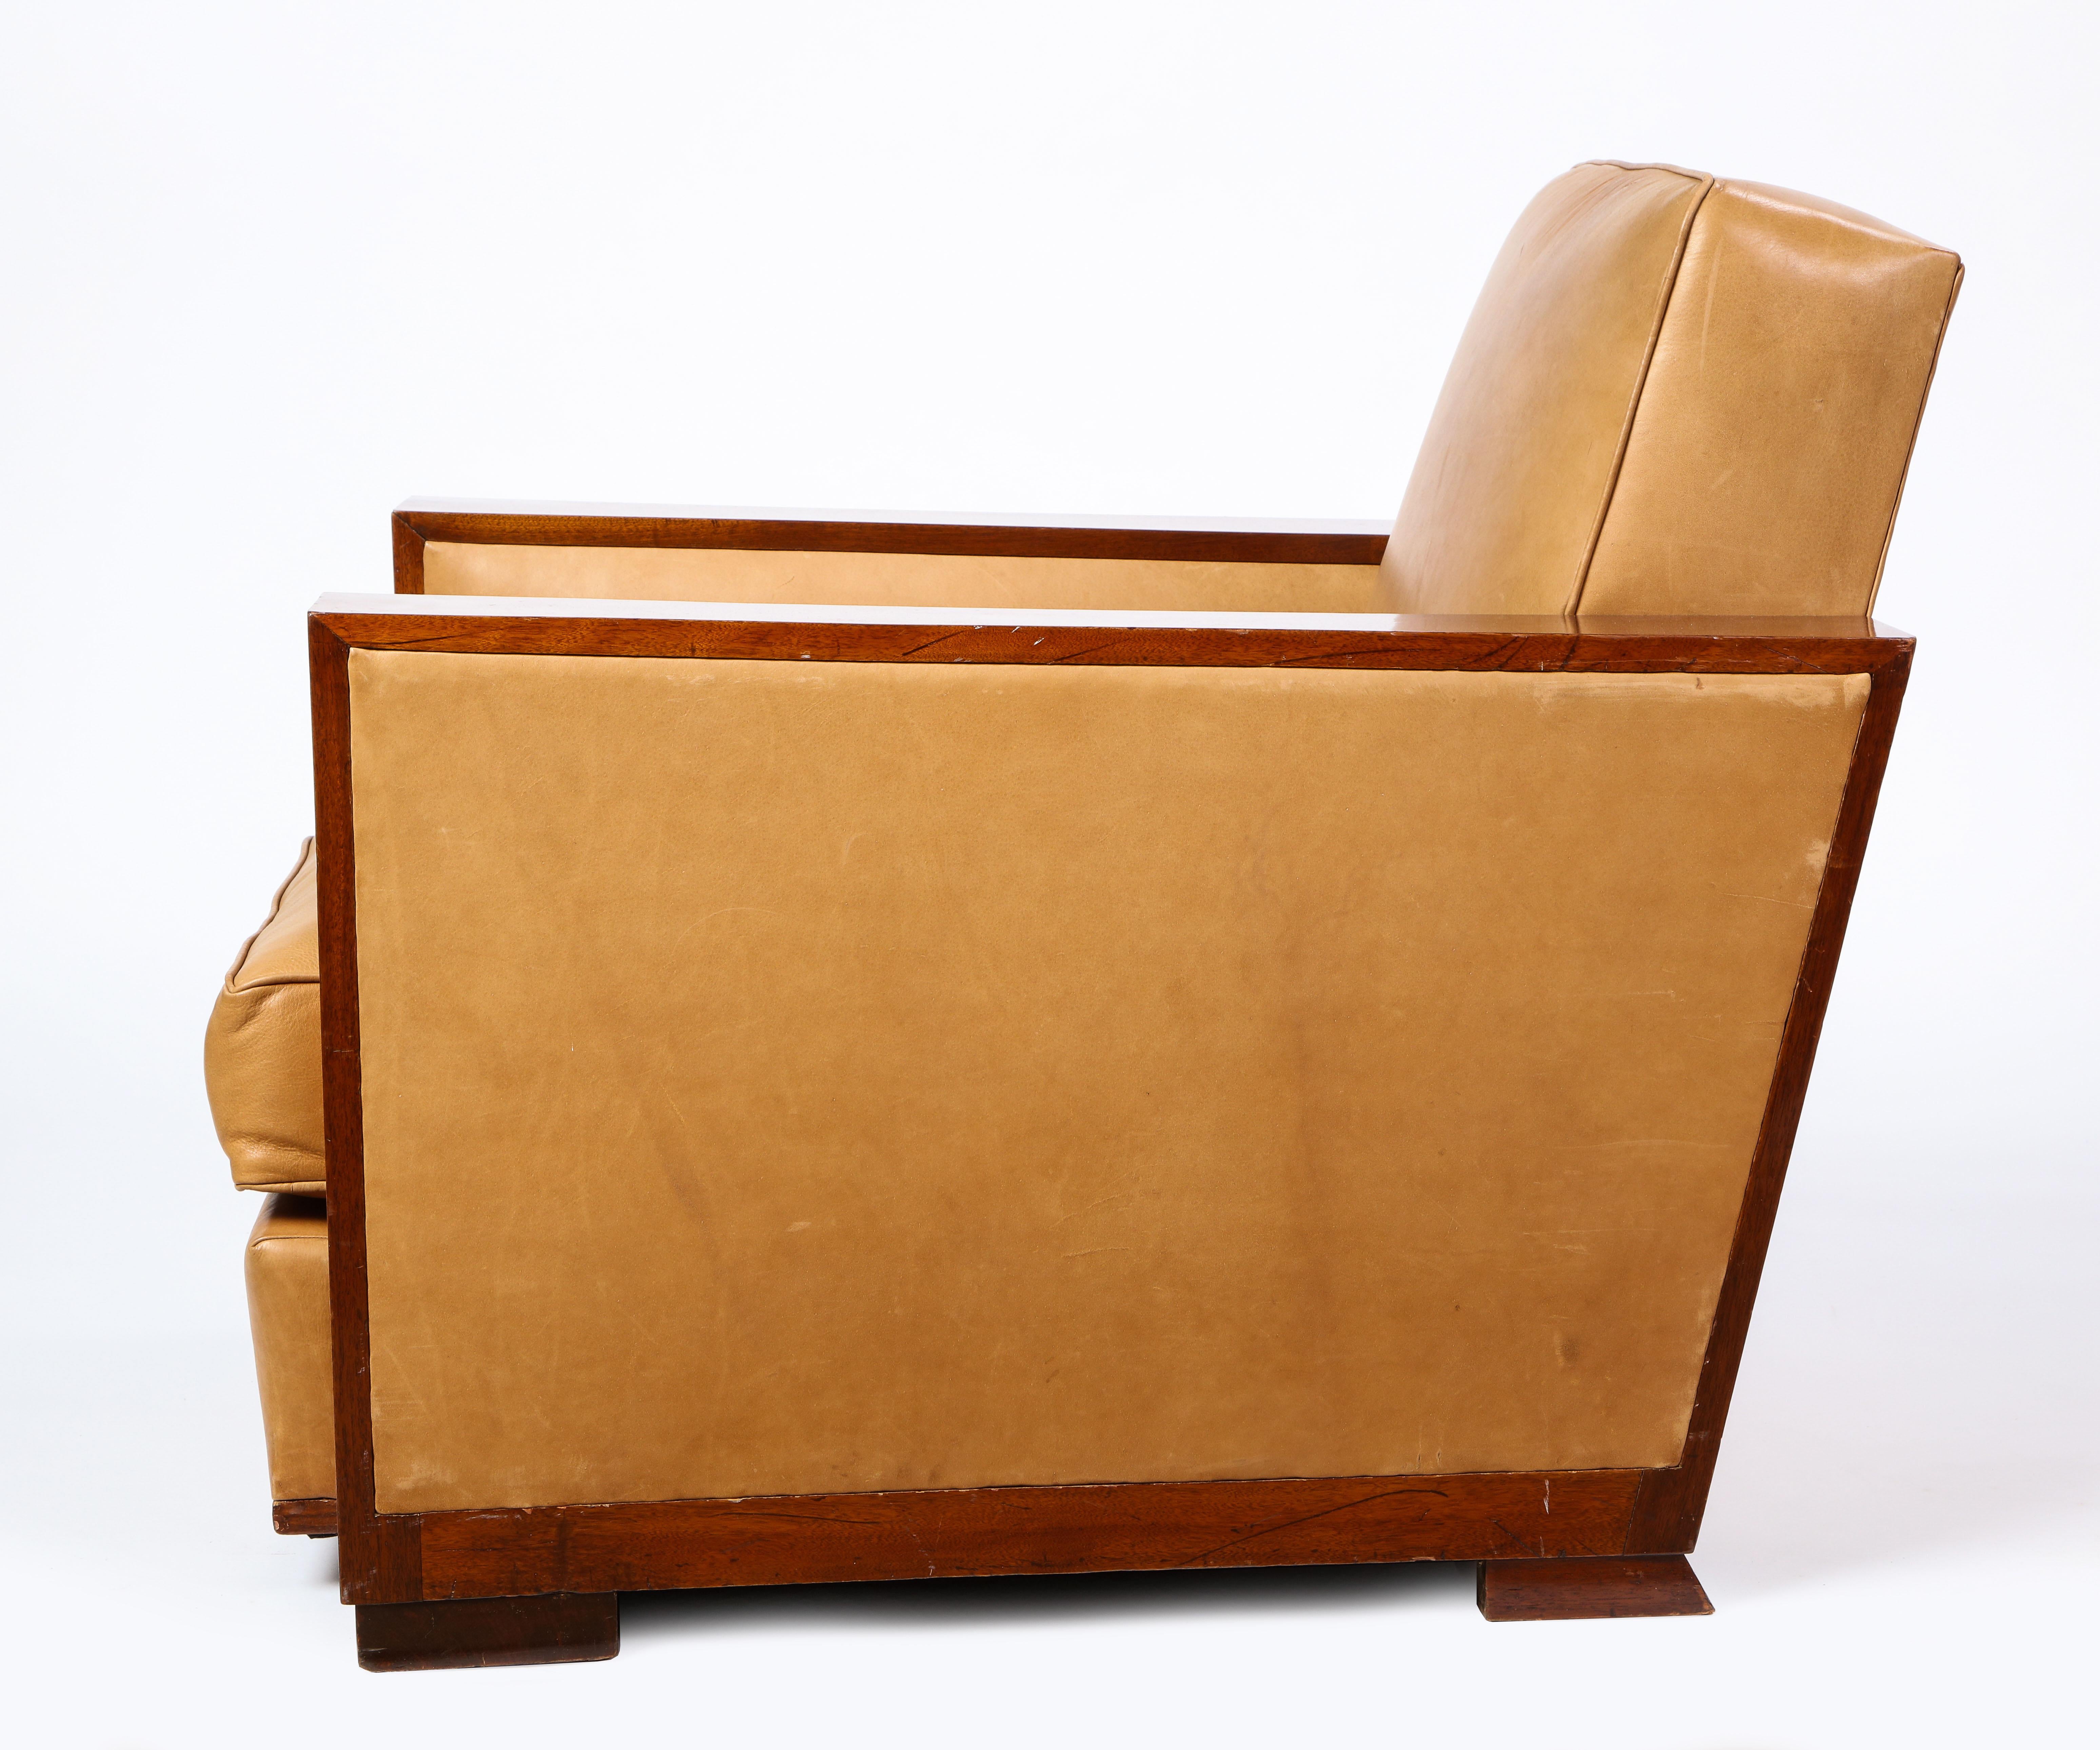 This French mid-20th century leather upholstered and mahogany club chair is attributed to Dominique. Upholstered with a soft and comfortable buttery tan leather over warm mahogany. Its Art Deco style design is practical and chic and would be a